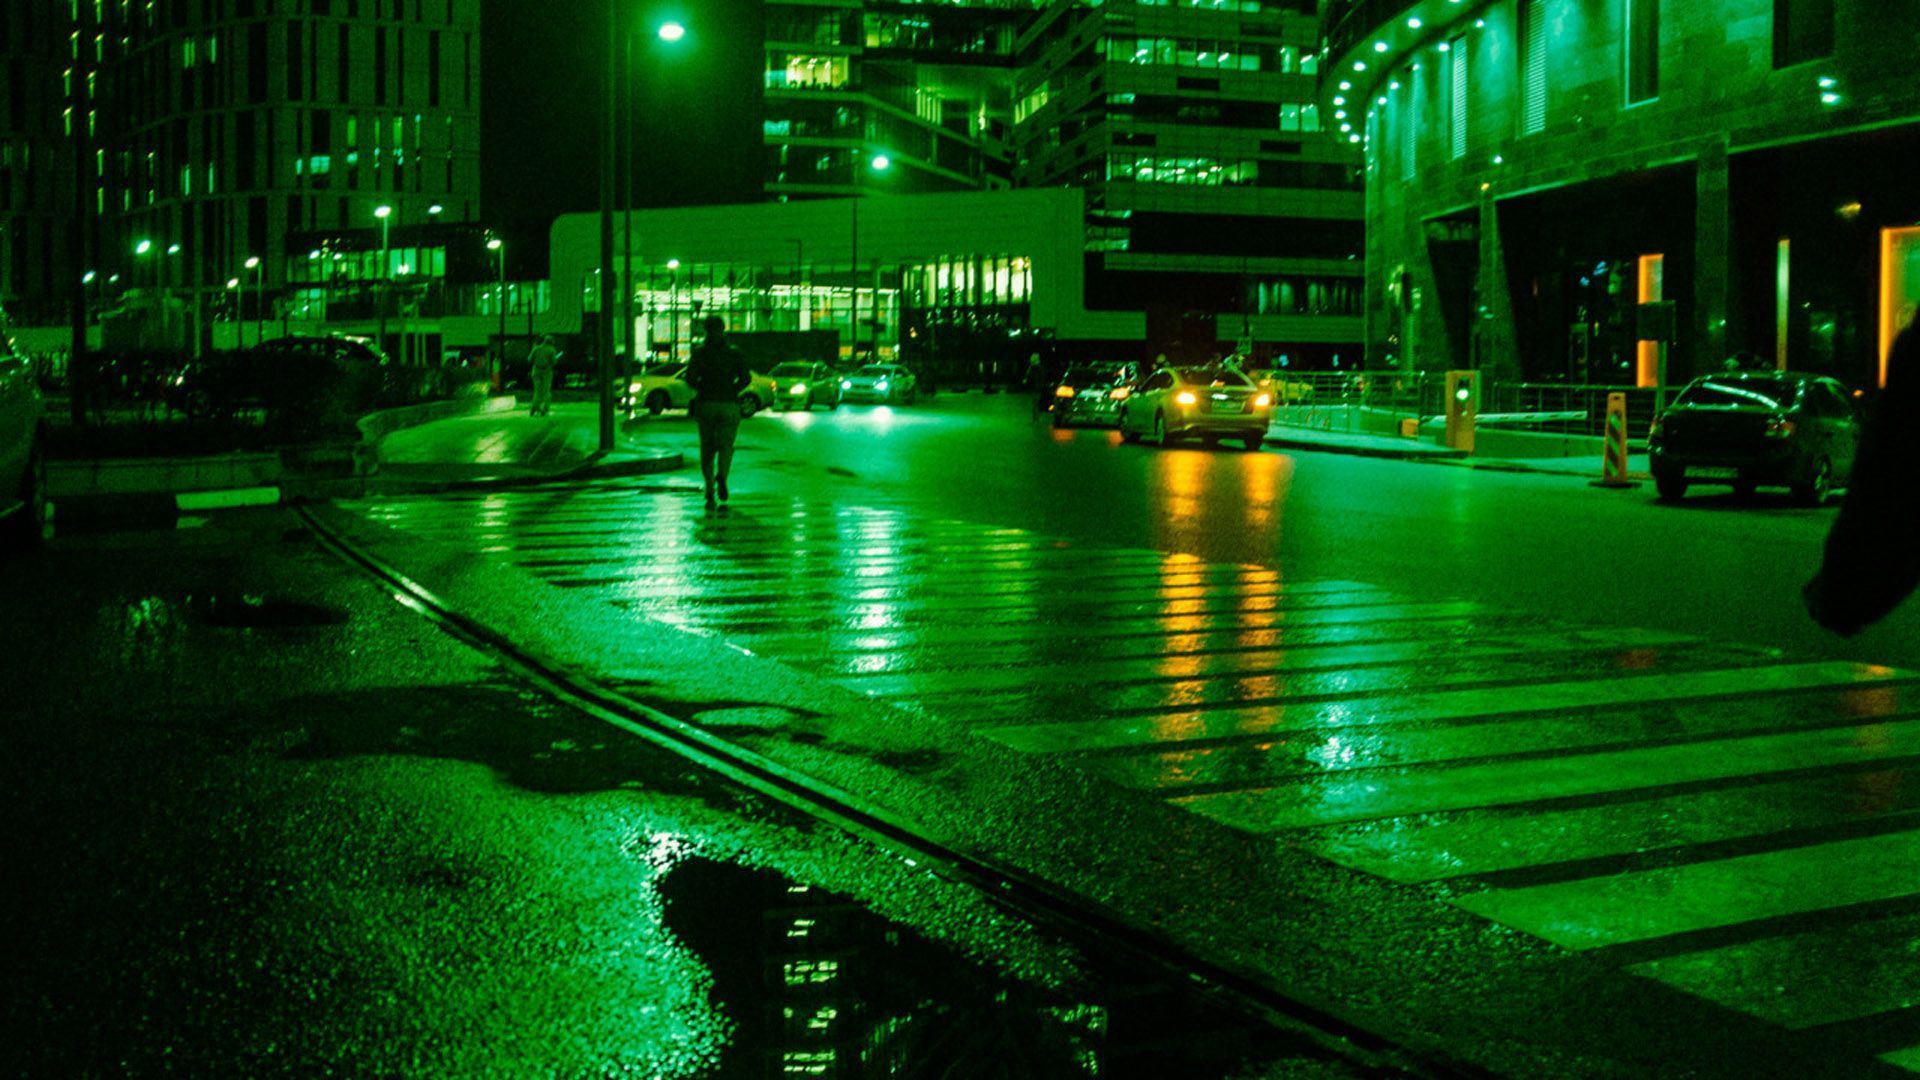 Green Lights Road Buildings Vehicles During Nighttime HD Green Aesthetic Wallpaper